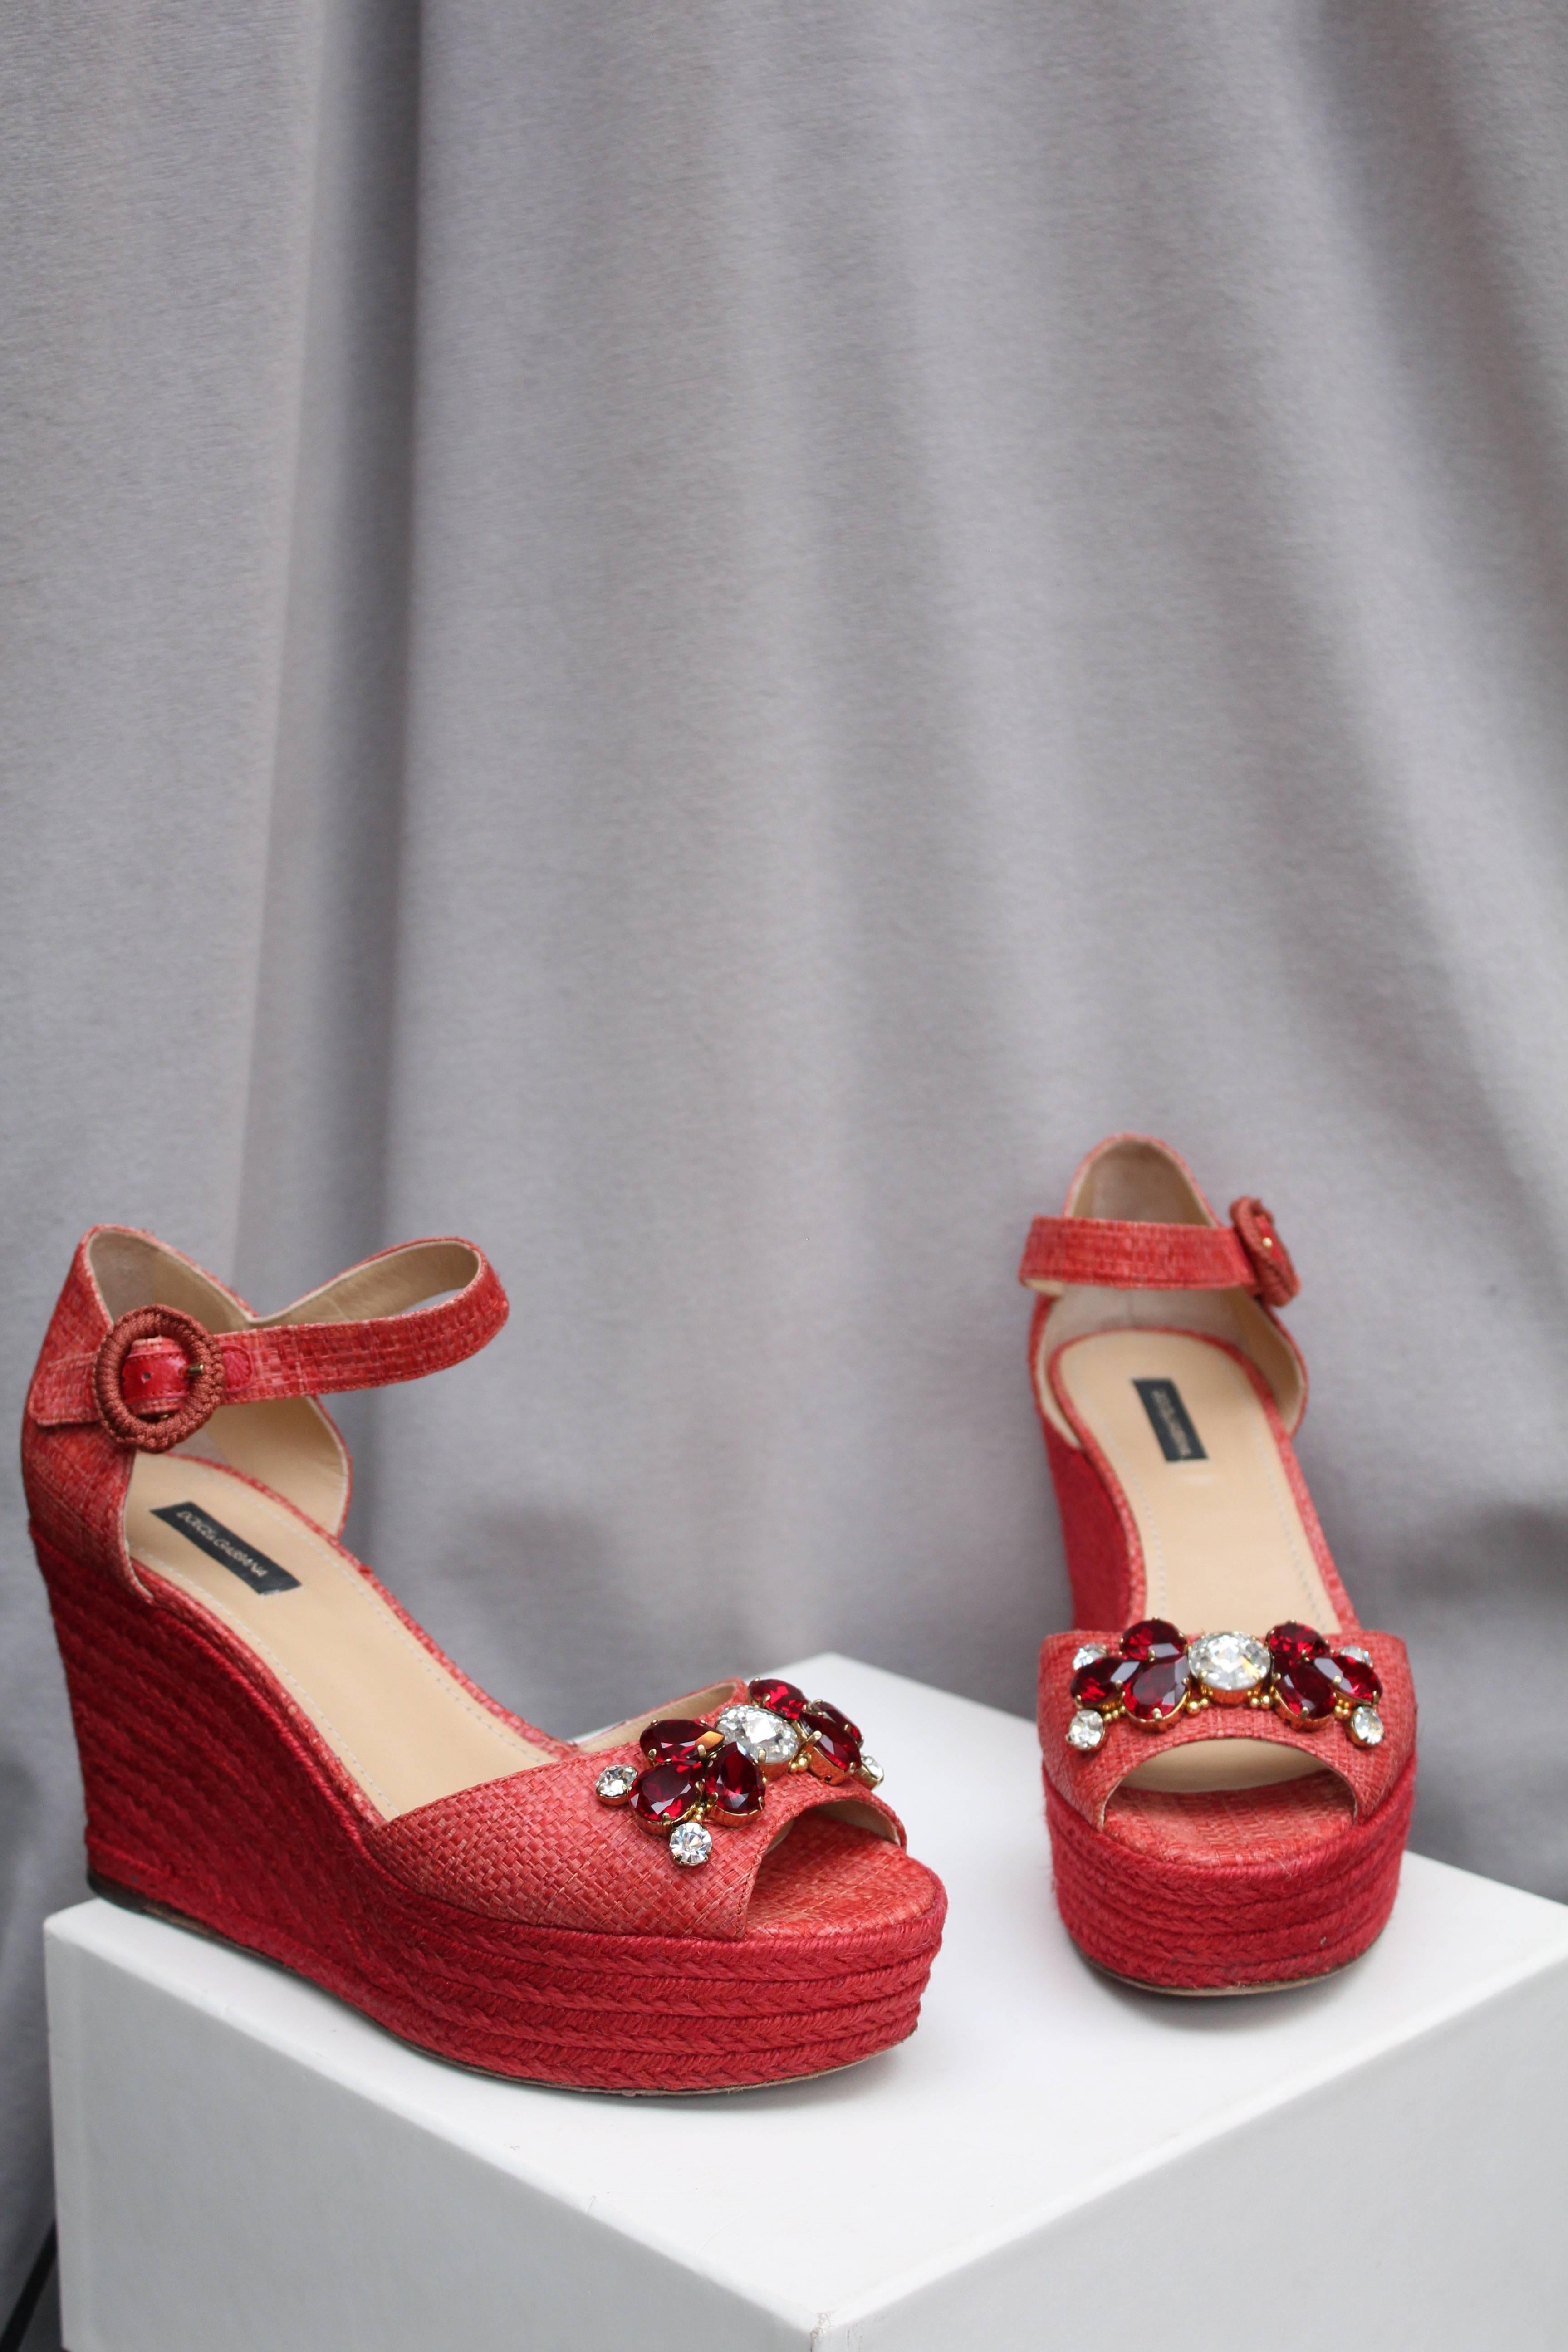 DOLCE & GABBANA (Made in Italy) Lovely platform sandals made of red raffia with woven jute sole. They are decorated in the front with faceted rhinestones in white or red colors. The gilded metal ankle strap is covered with trimmings.

This “Bianca”